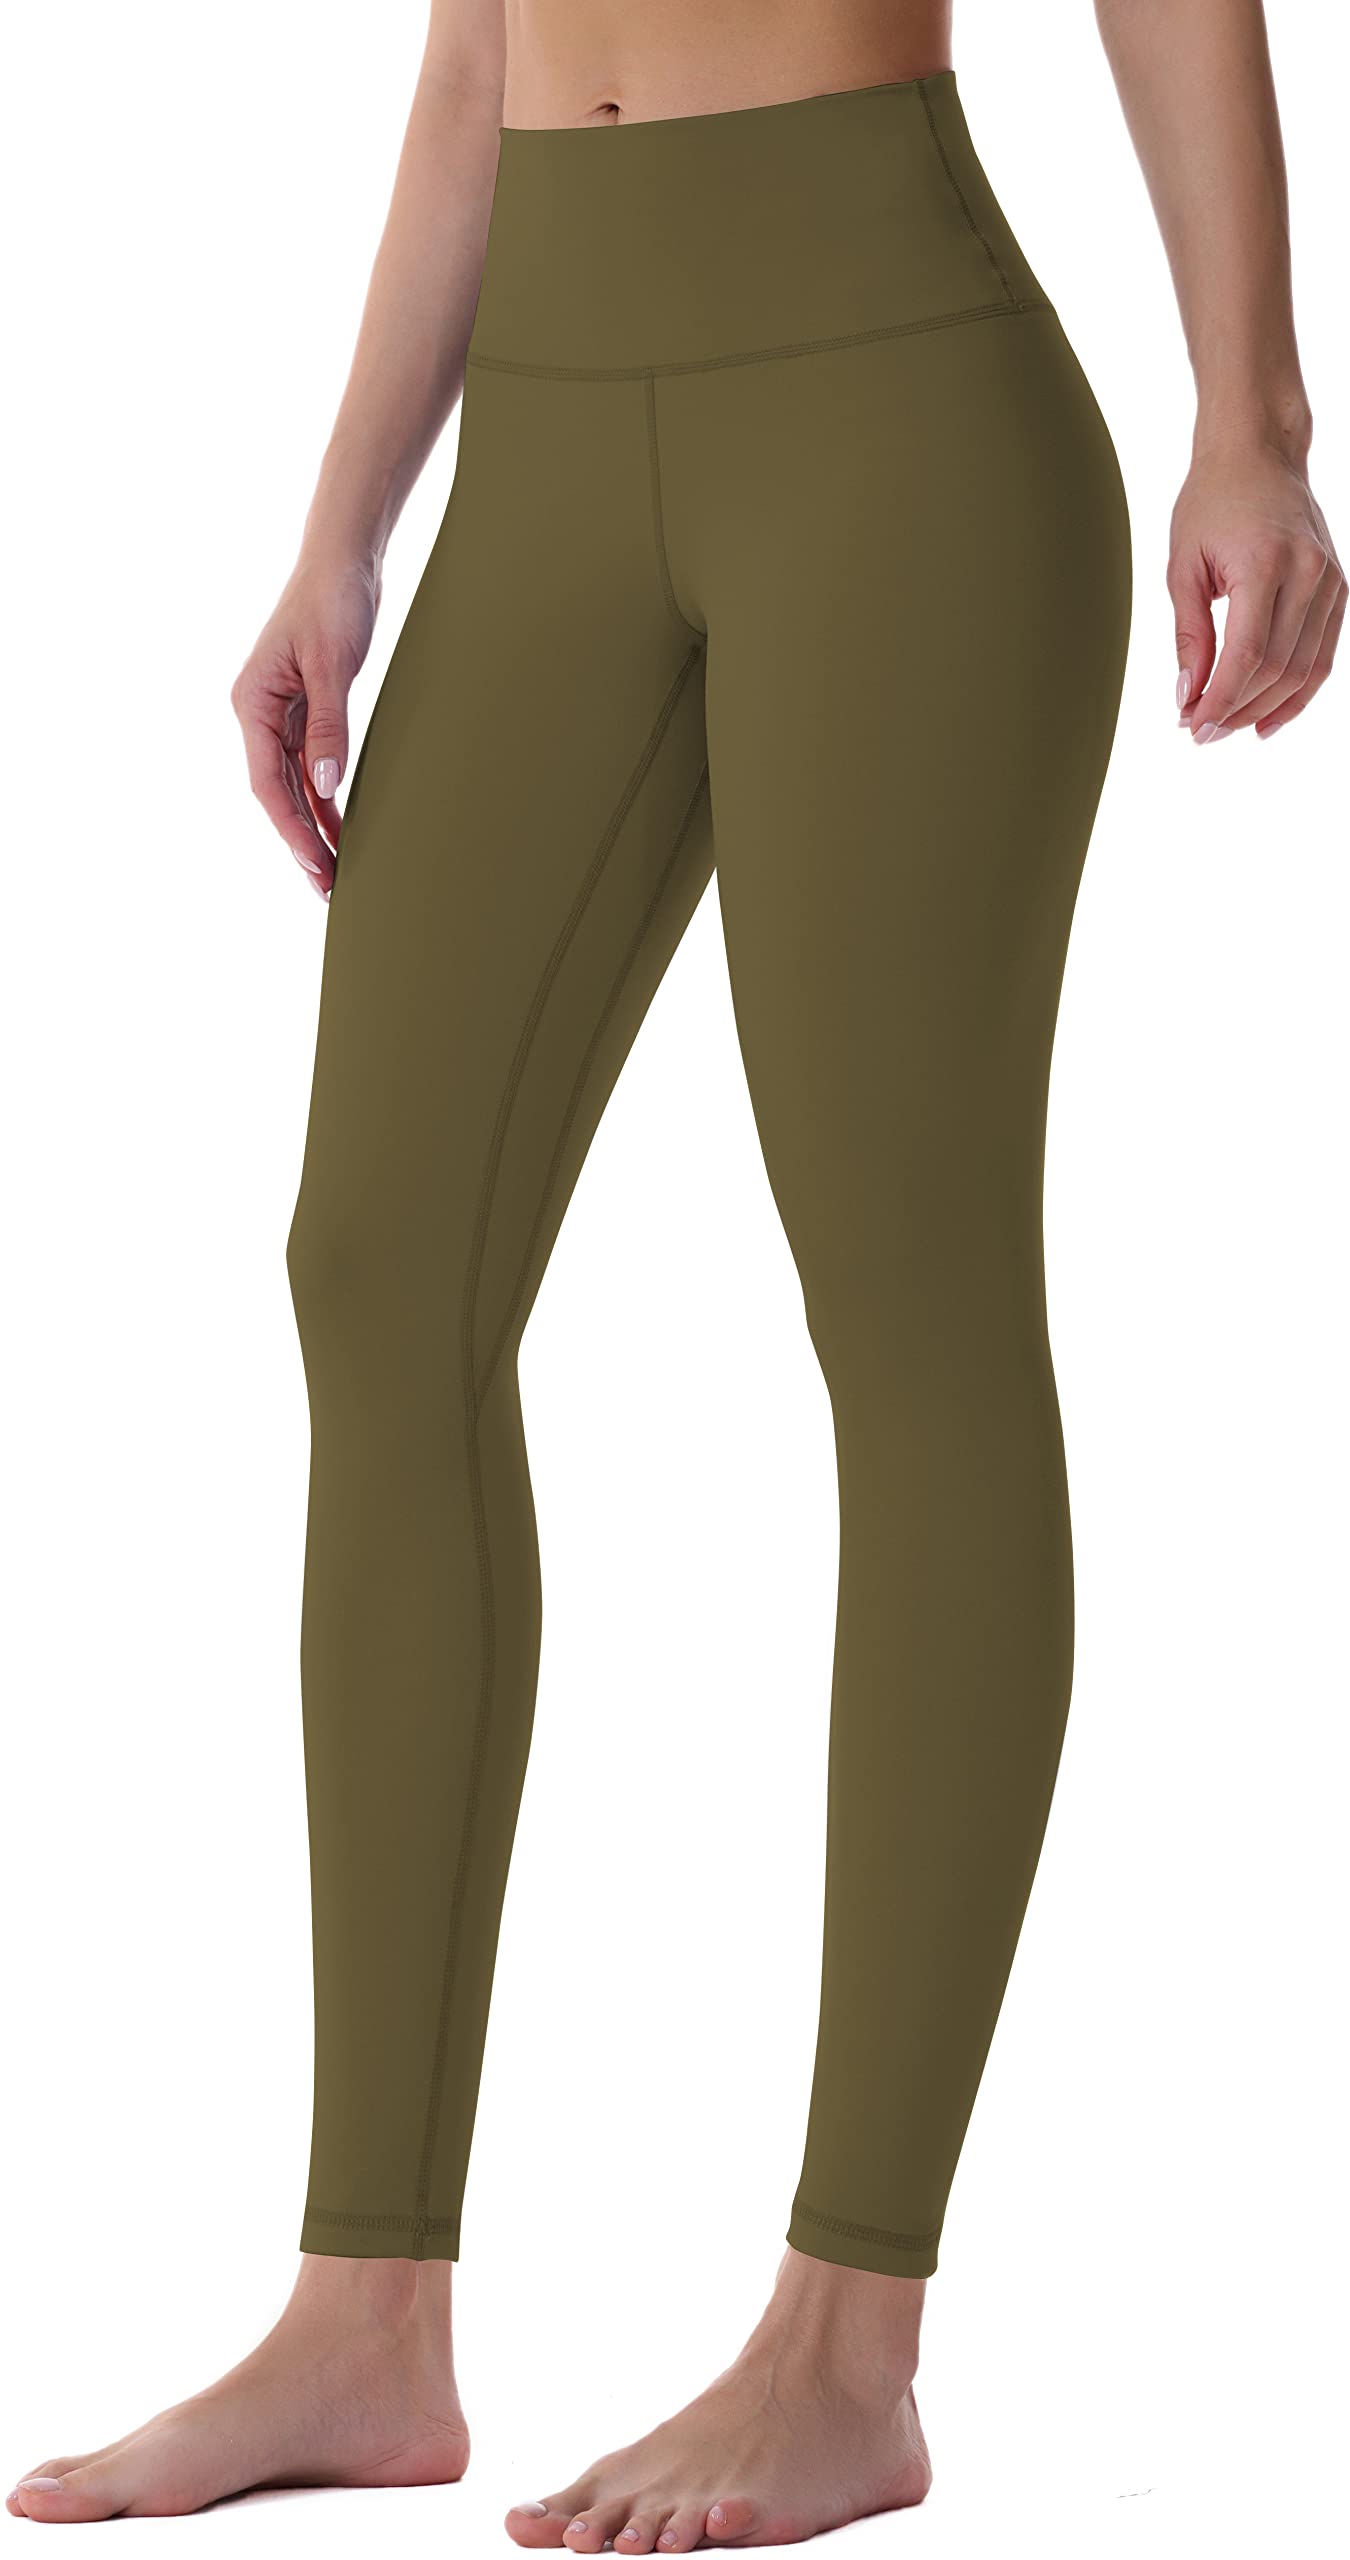  Workout Leggings For Women, Squat Proof High Waisted Yoga  Pants 4 Way Stretch, Buttery Soft 28 Inseam Golf Green Medium